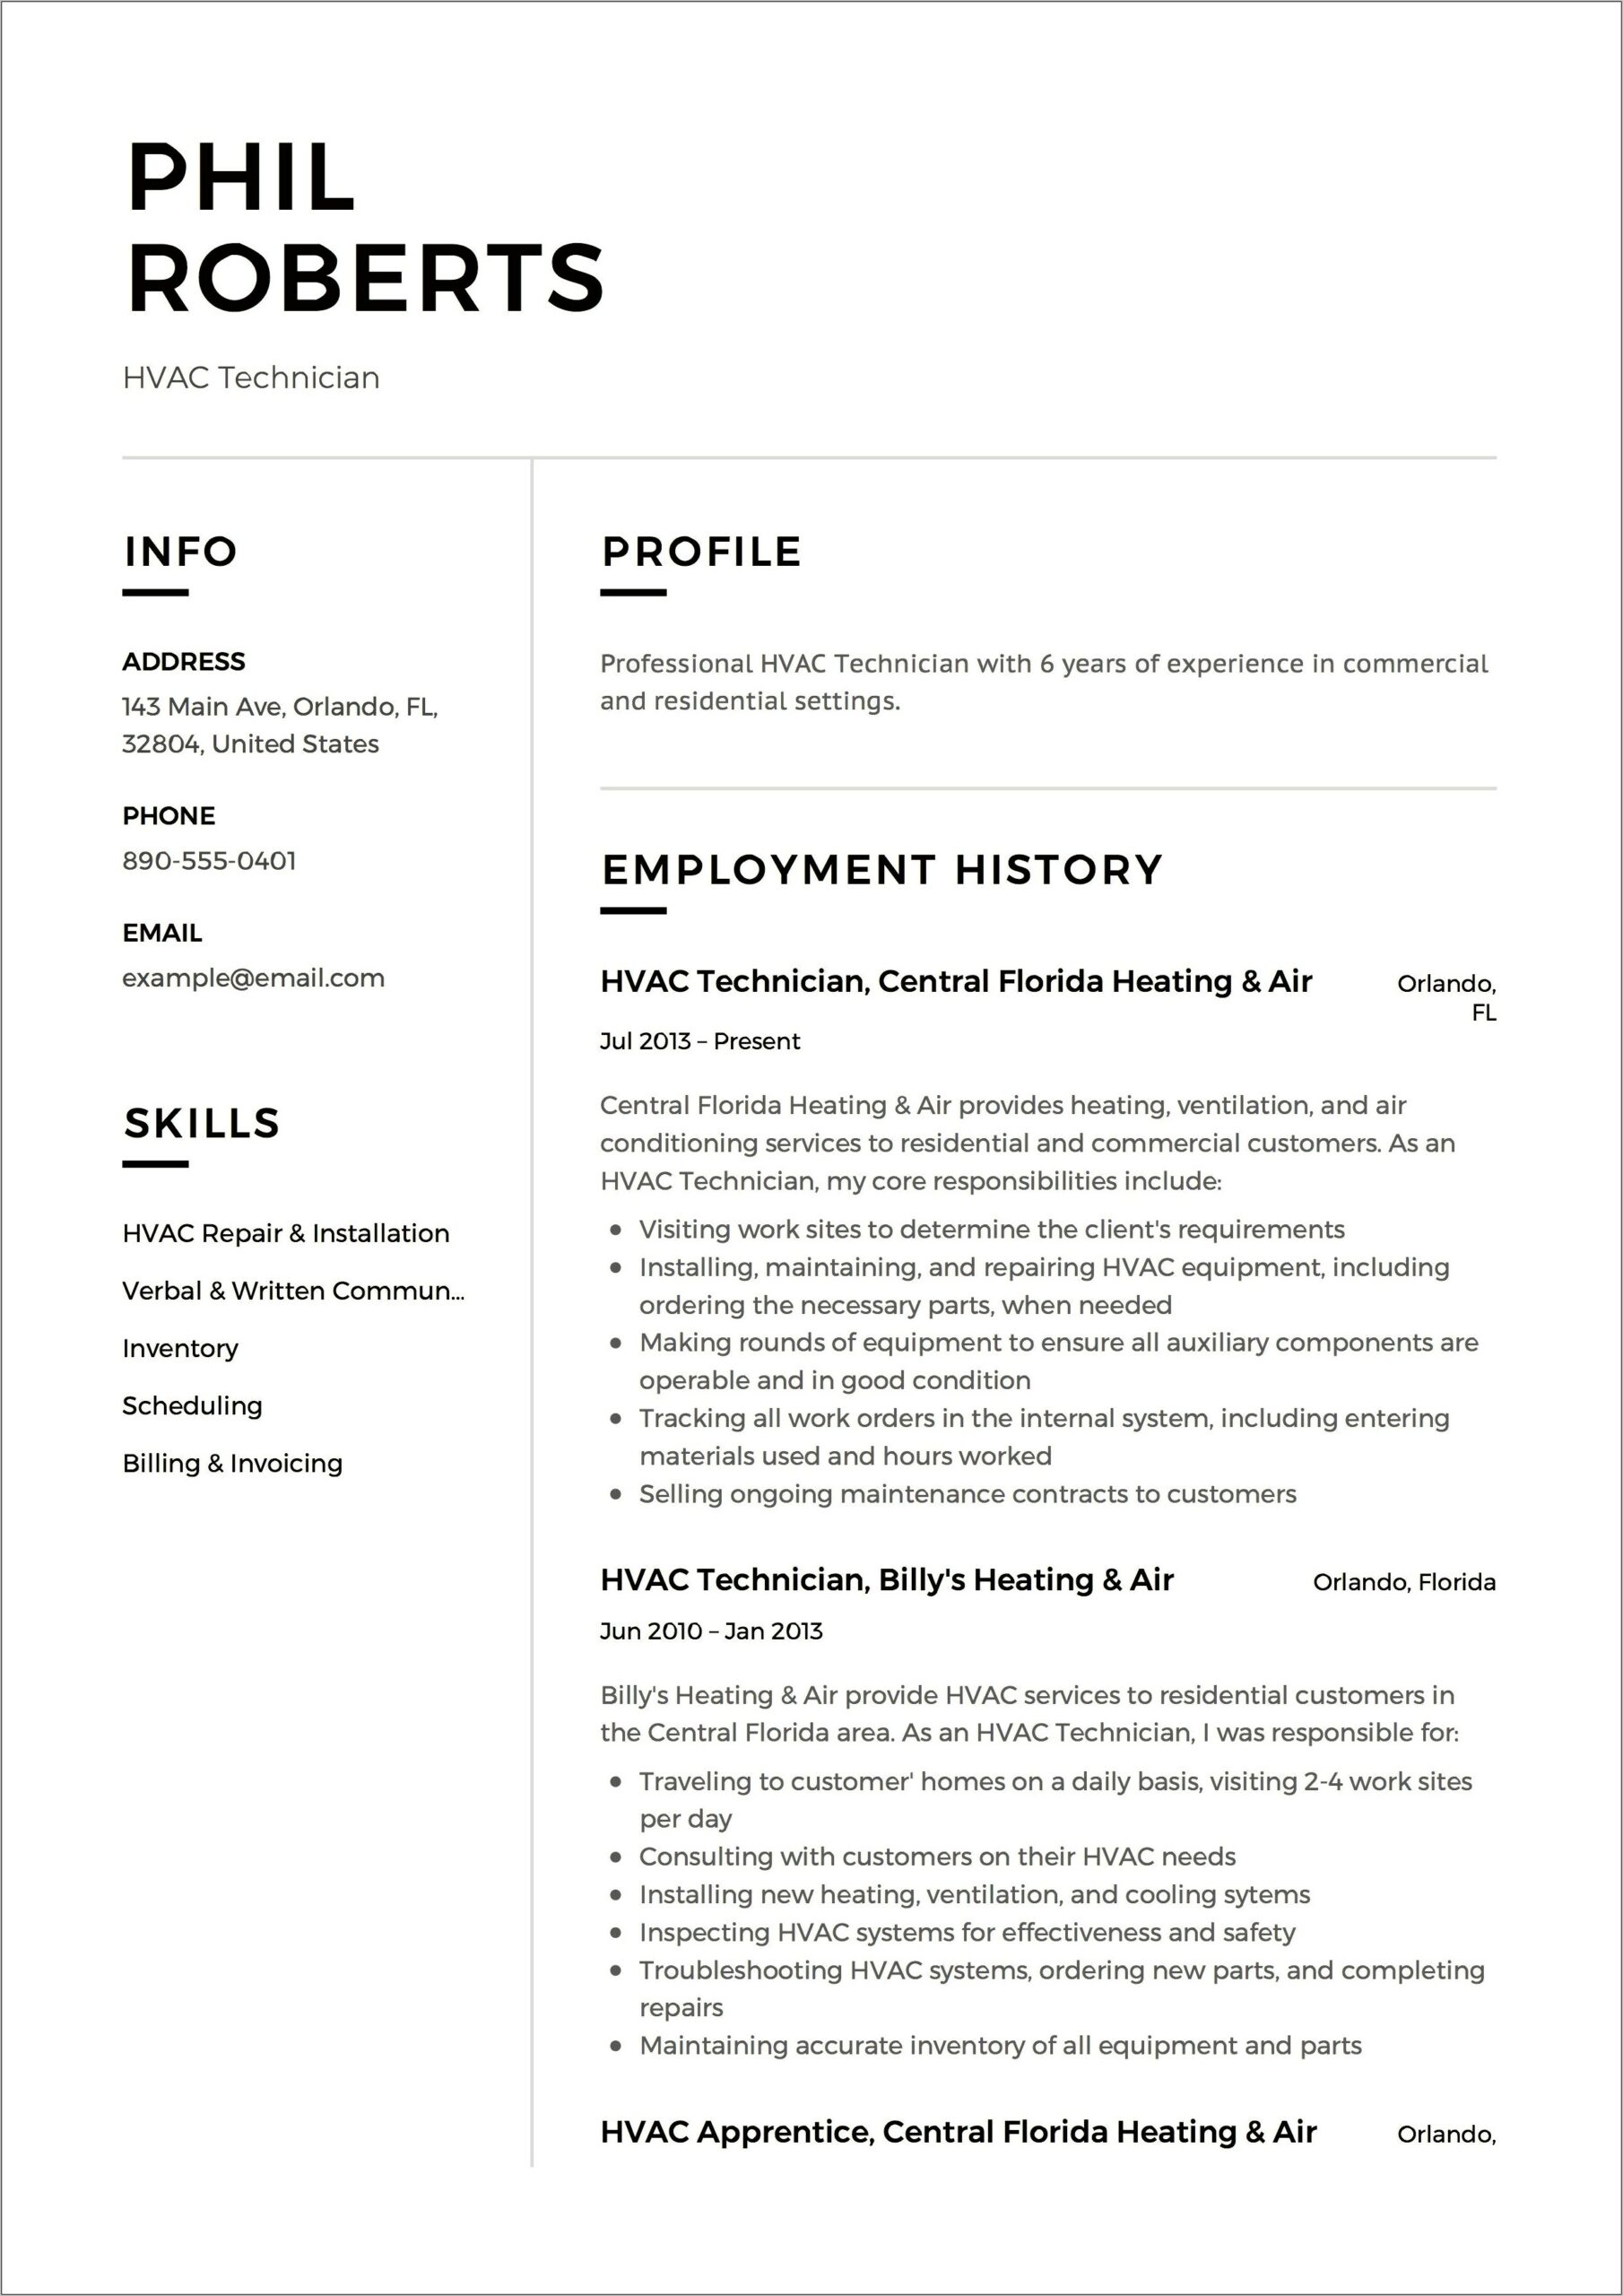 Resume For Hvac With No Experience